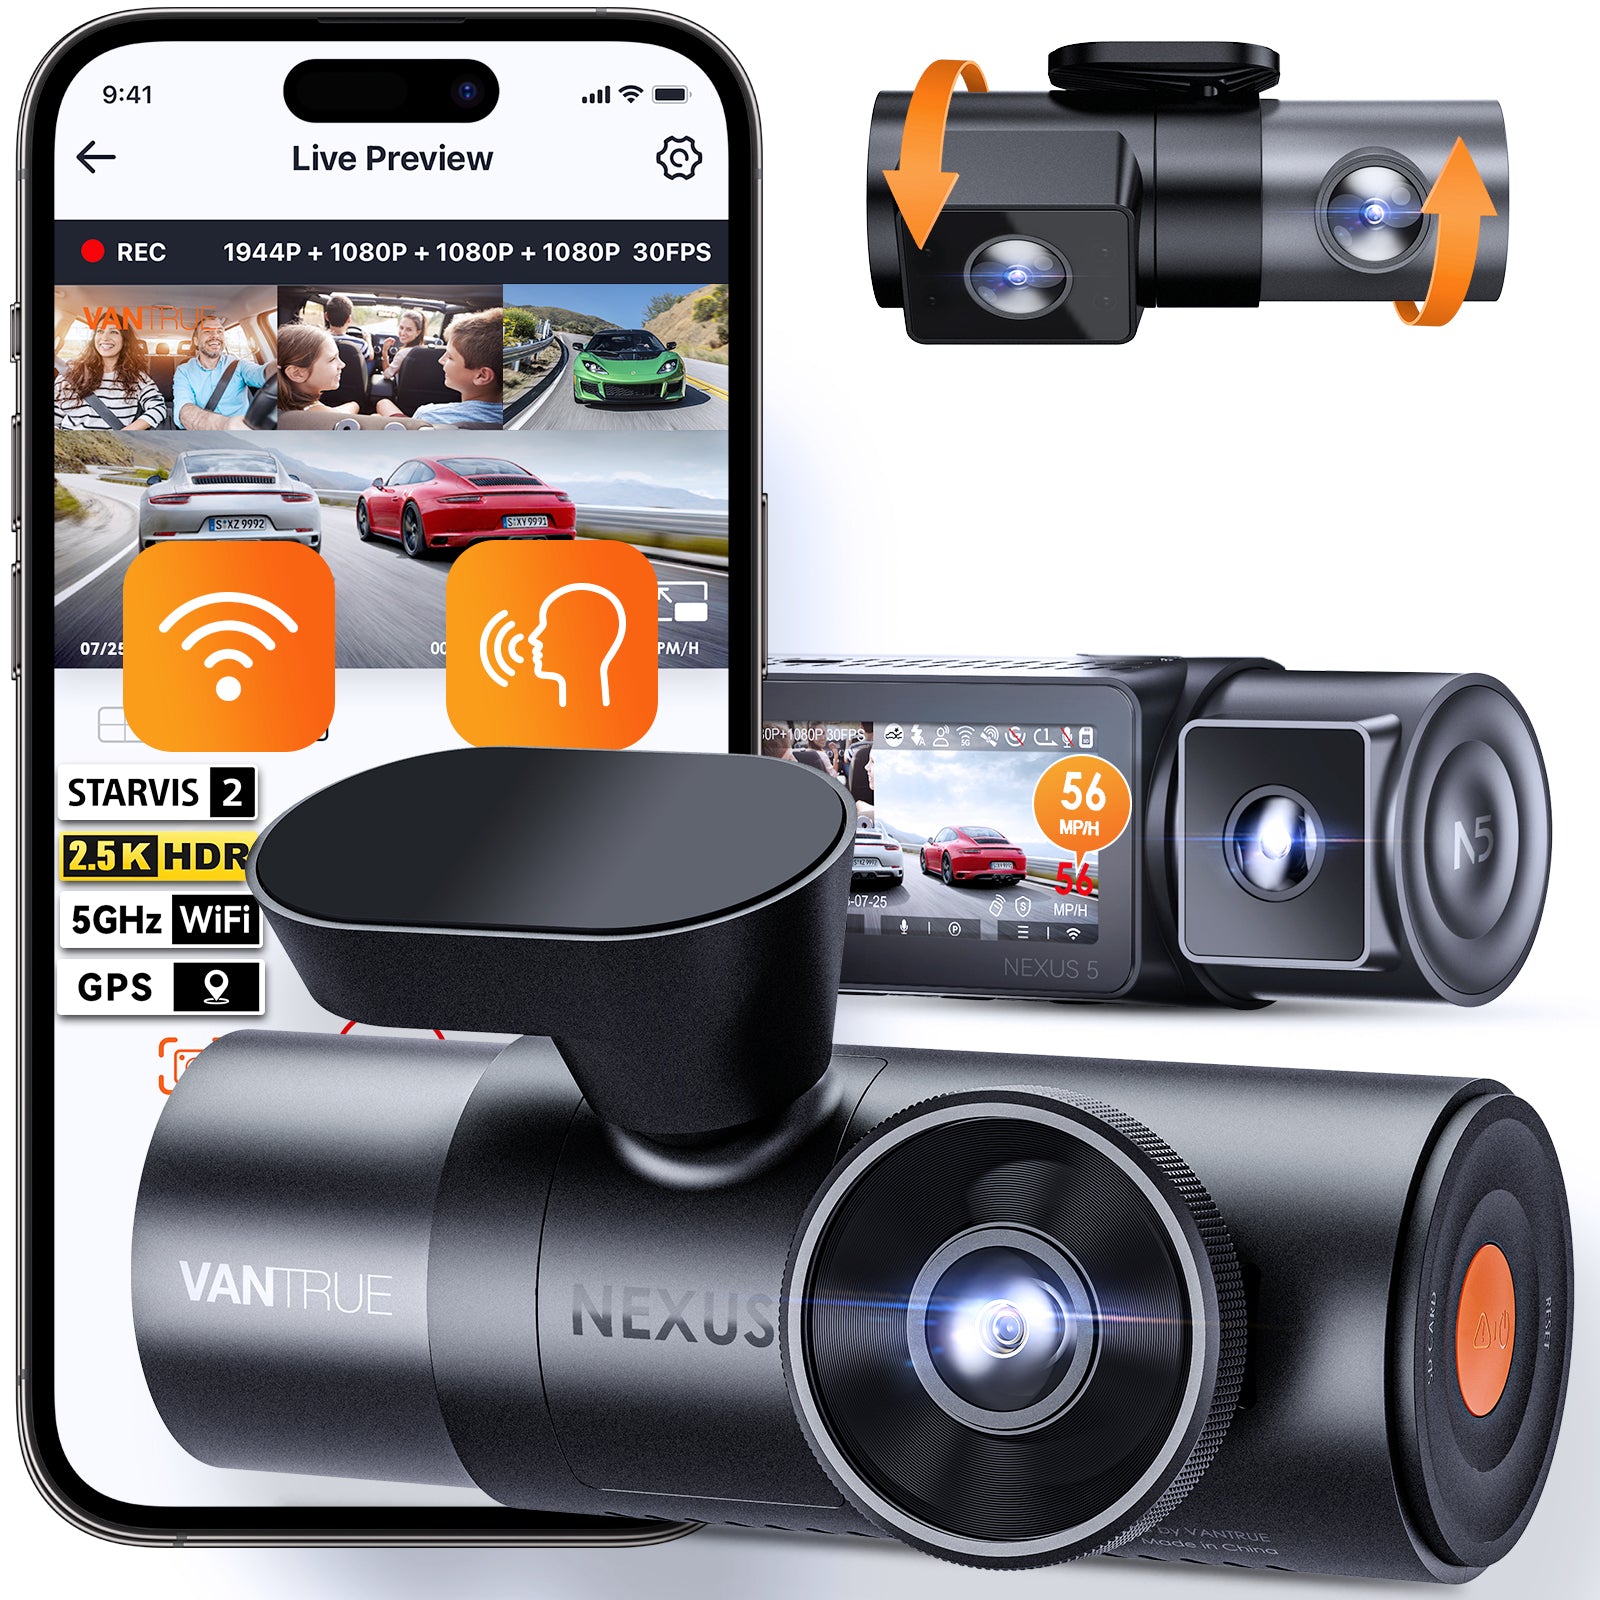 Be Smart & Install Korea Car Camera For Added Safety 